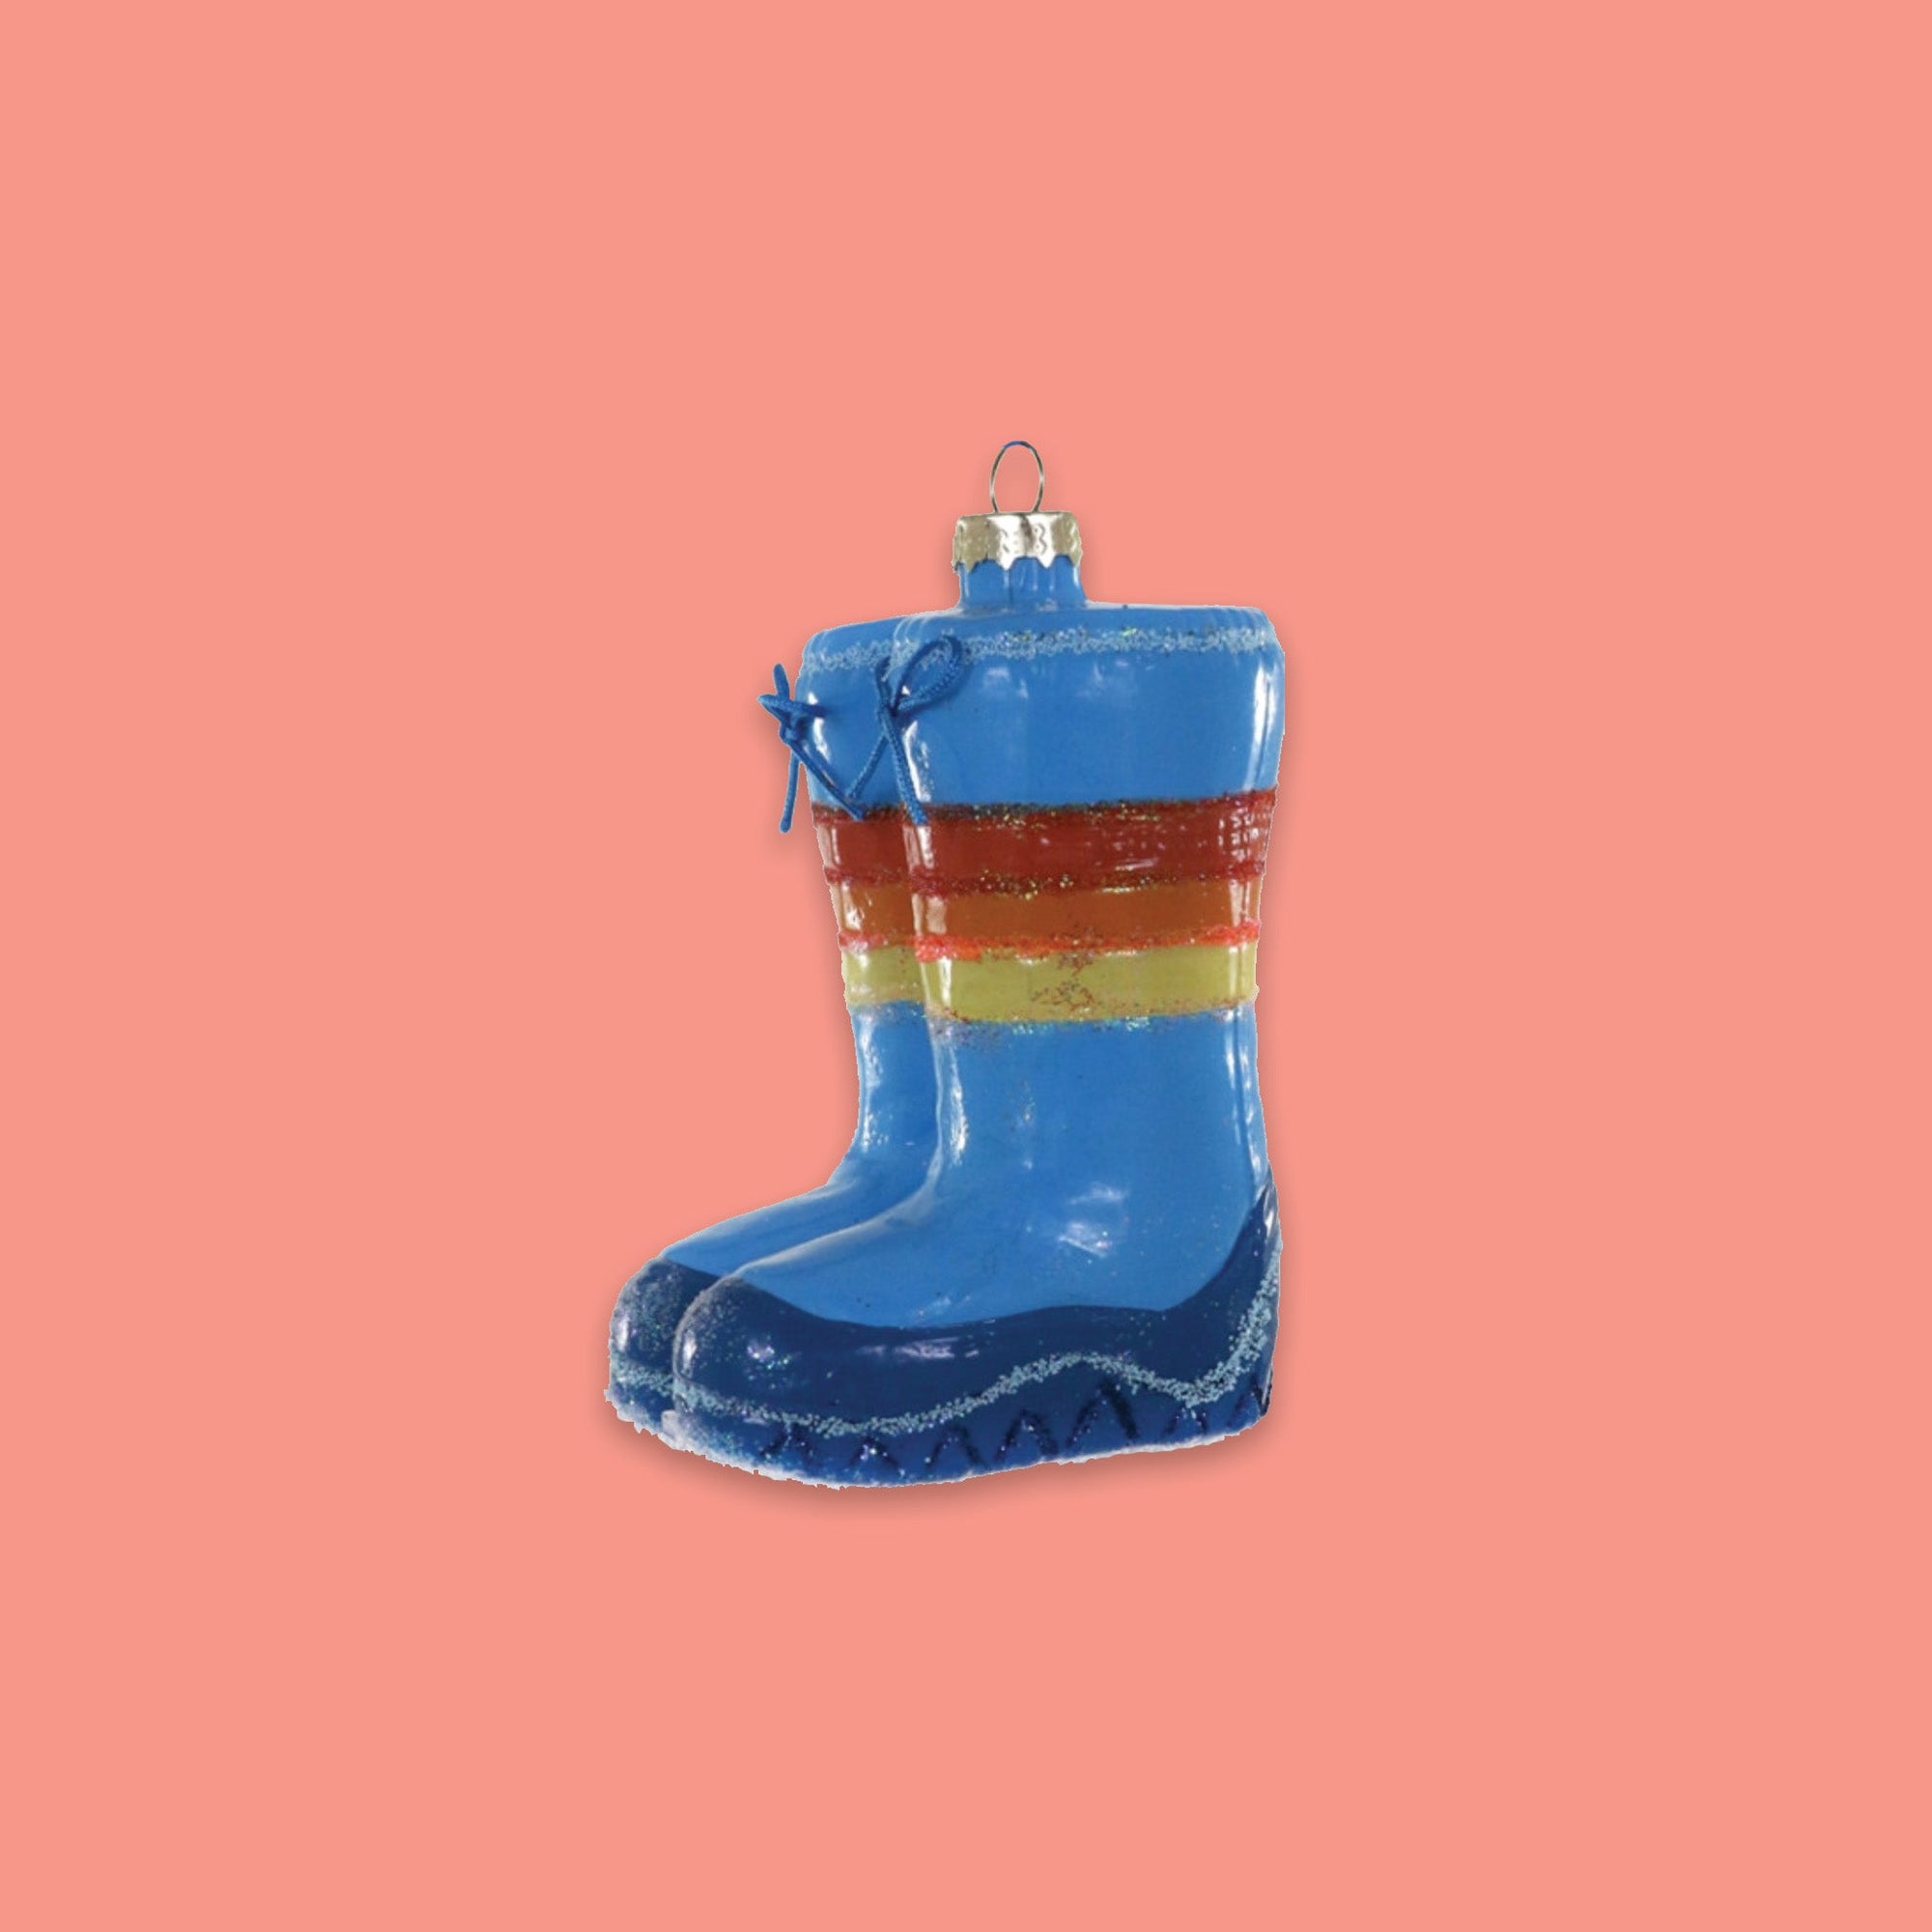 On a coral pink background sits a Rainbow Brite Moon Boots inspired glass ornament. It is in bright colors of navy, blue, yellow, orange, and red.